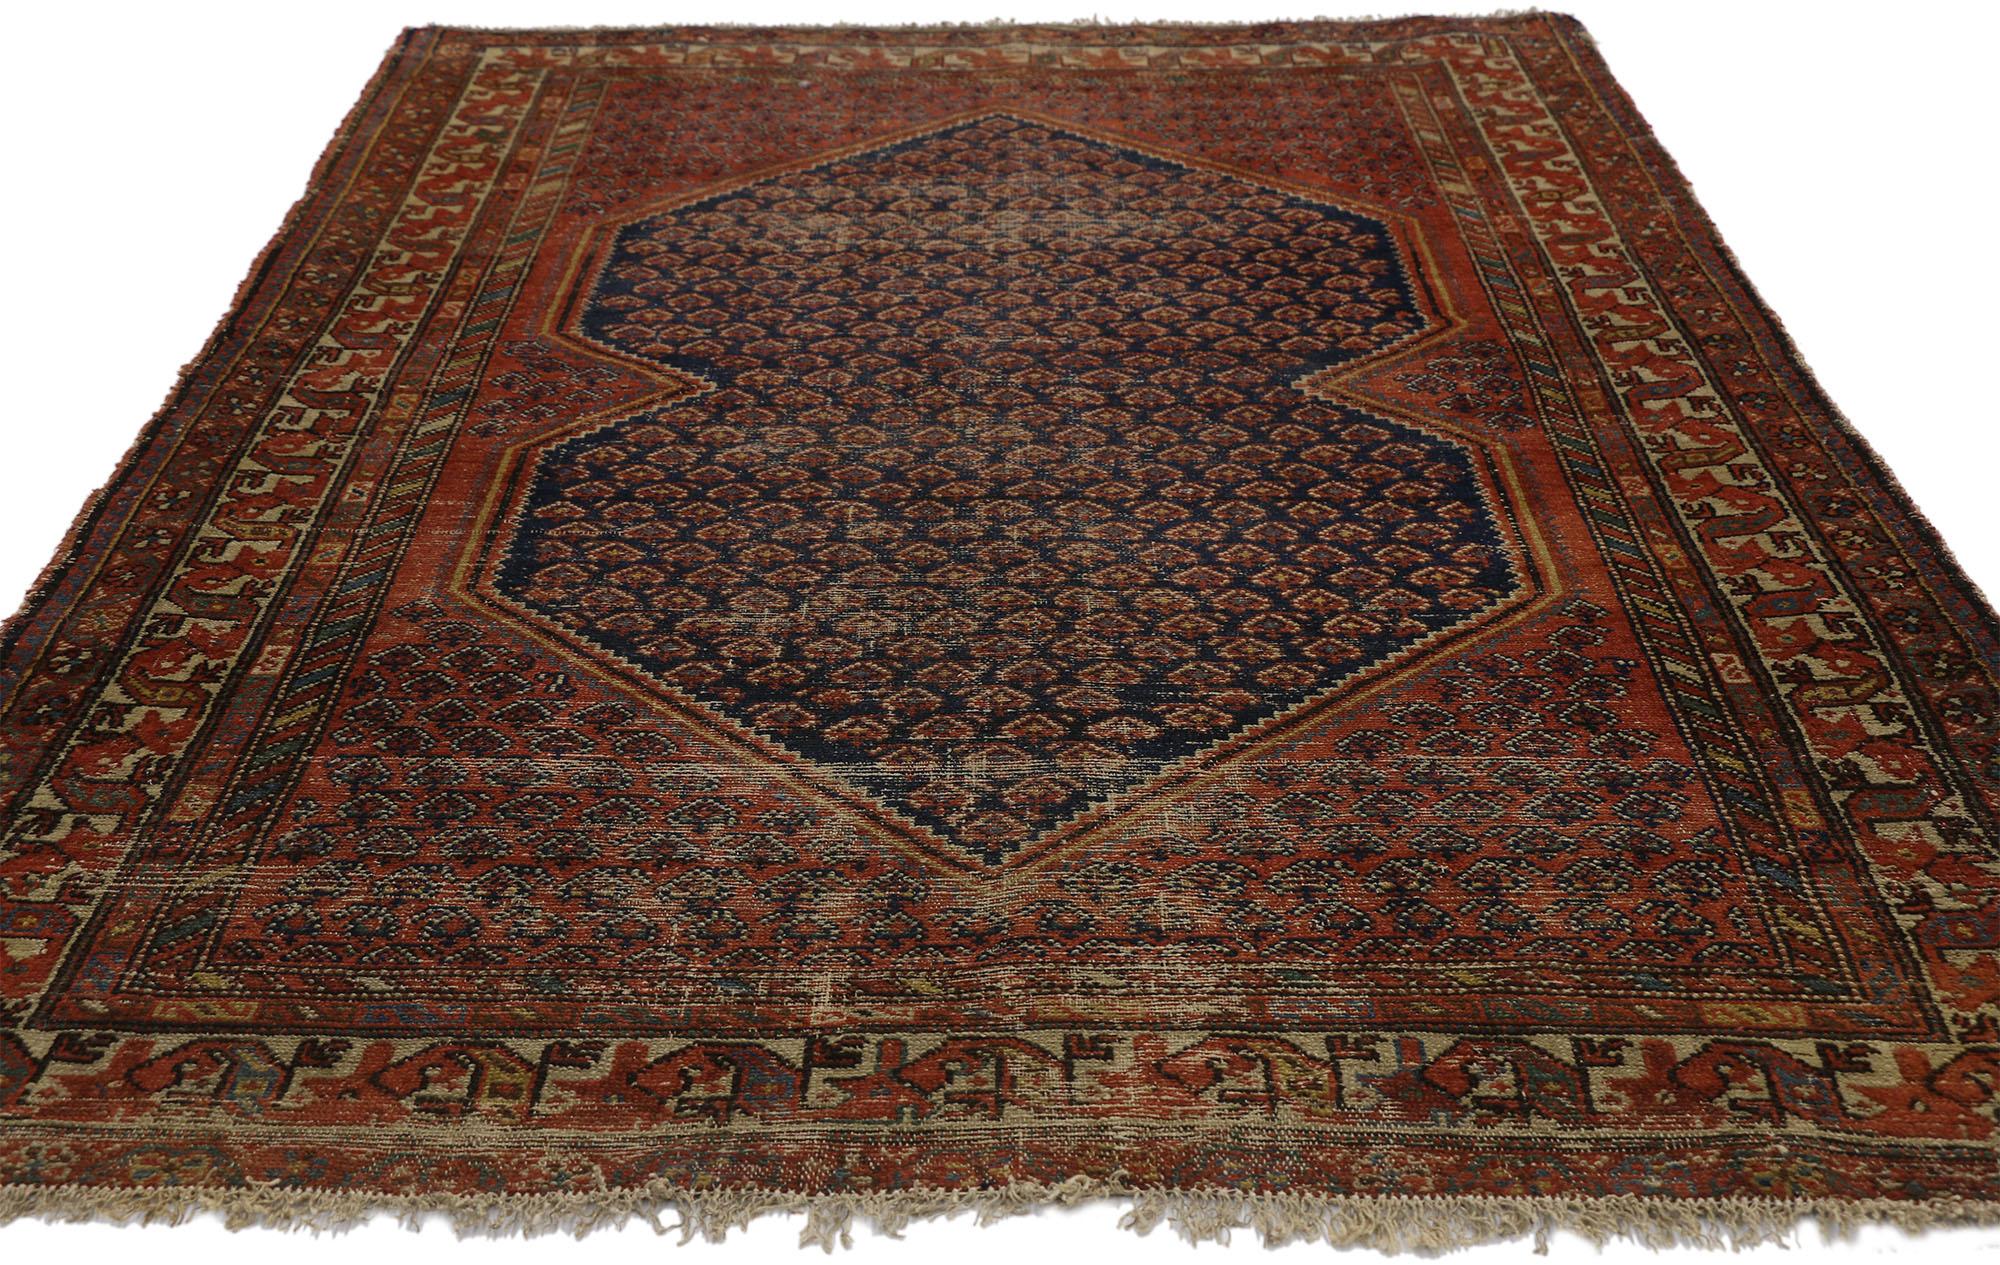 Hand-Knotted Distressed Antique Persian Malayer Rug with Rustic Artisan and Industrial Style